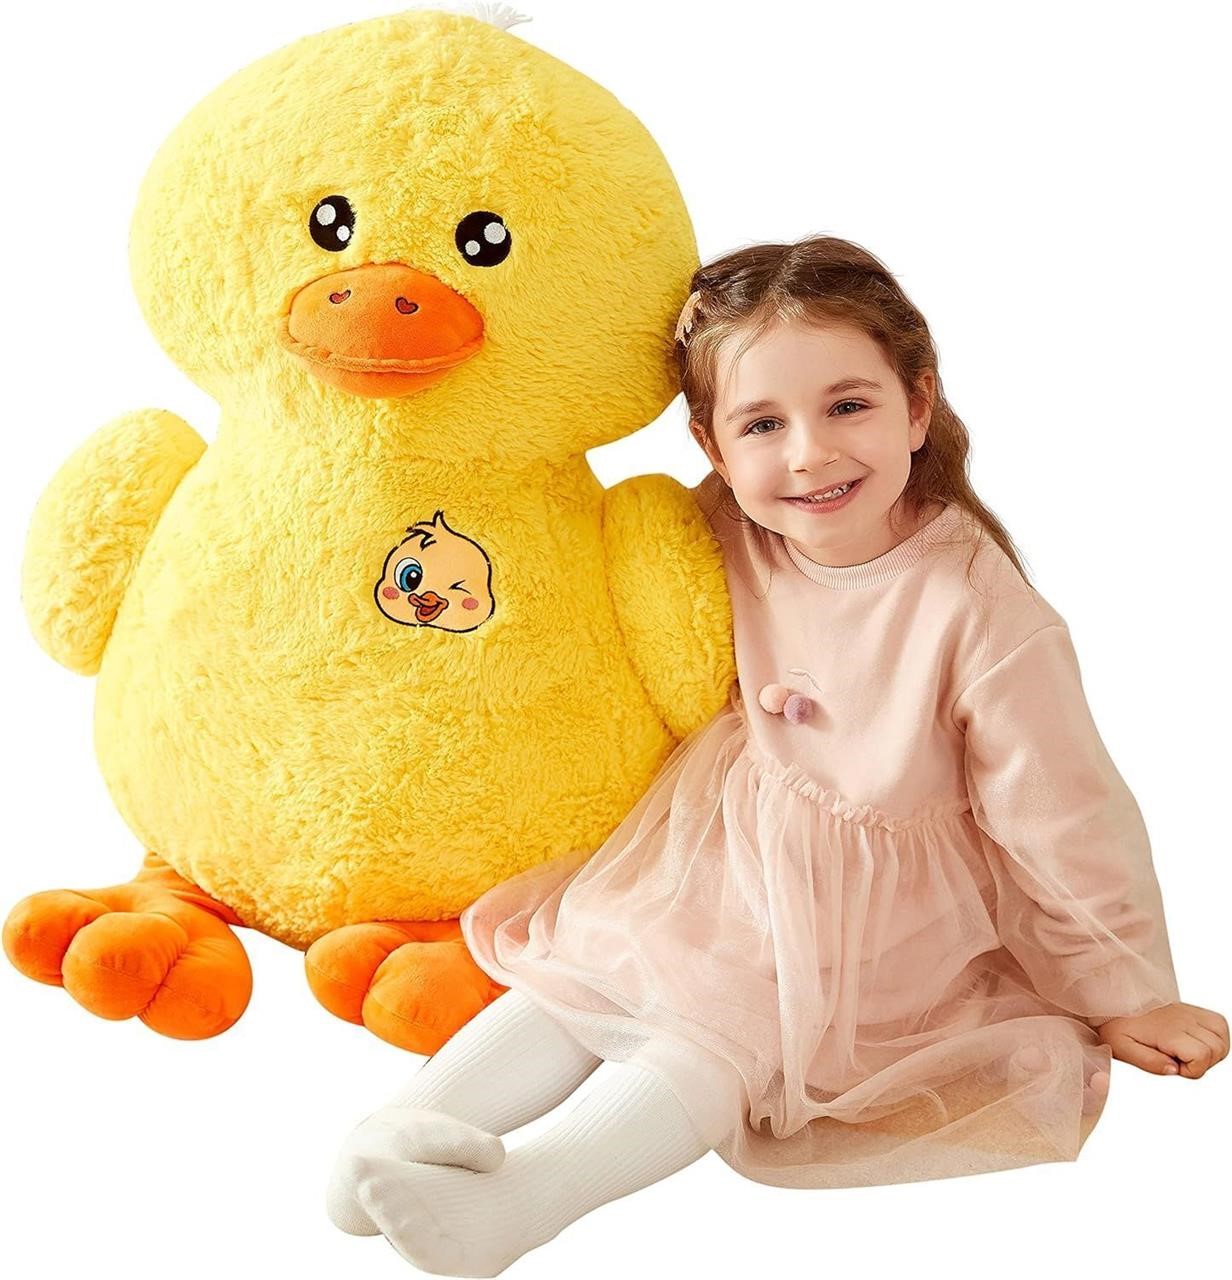 Large Duck Giant Soft Plush Toy,19"